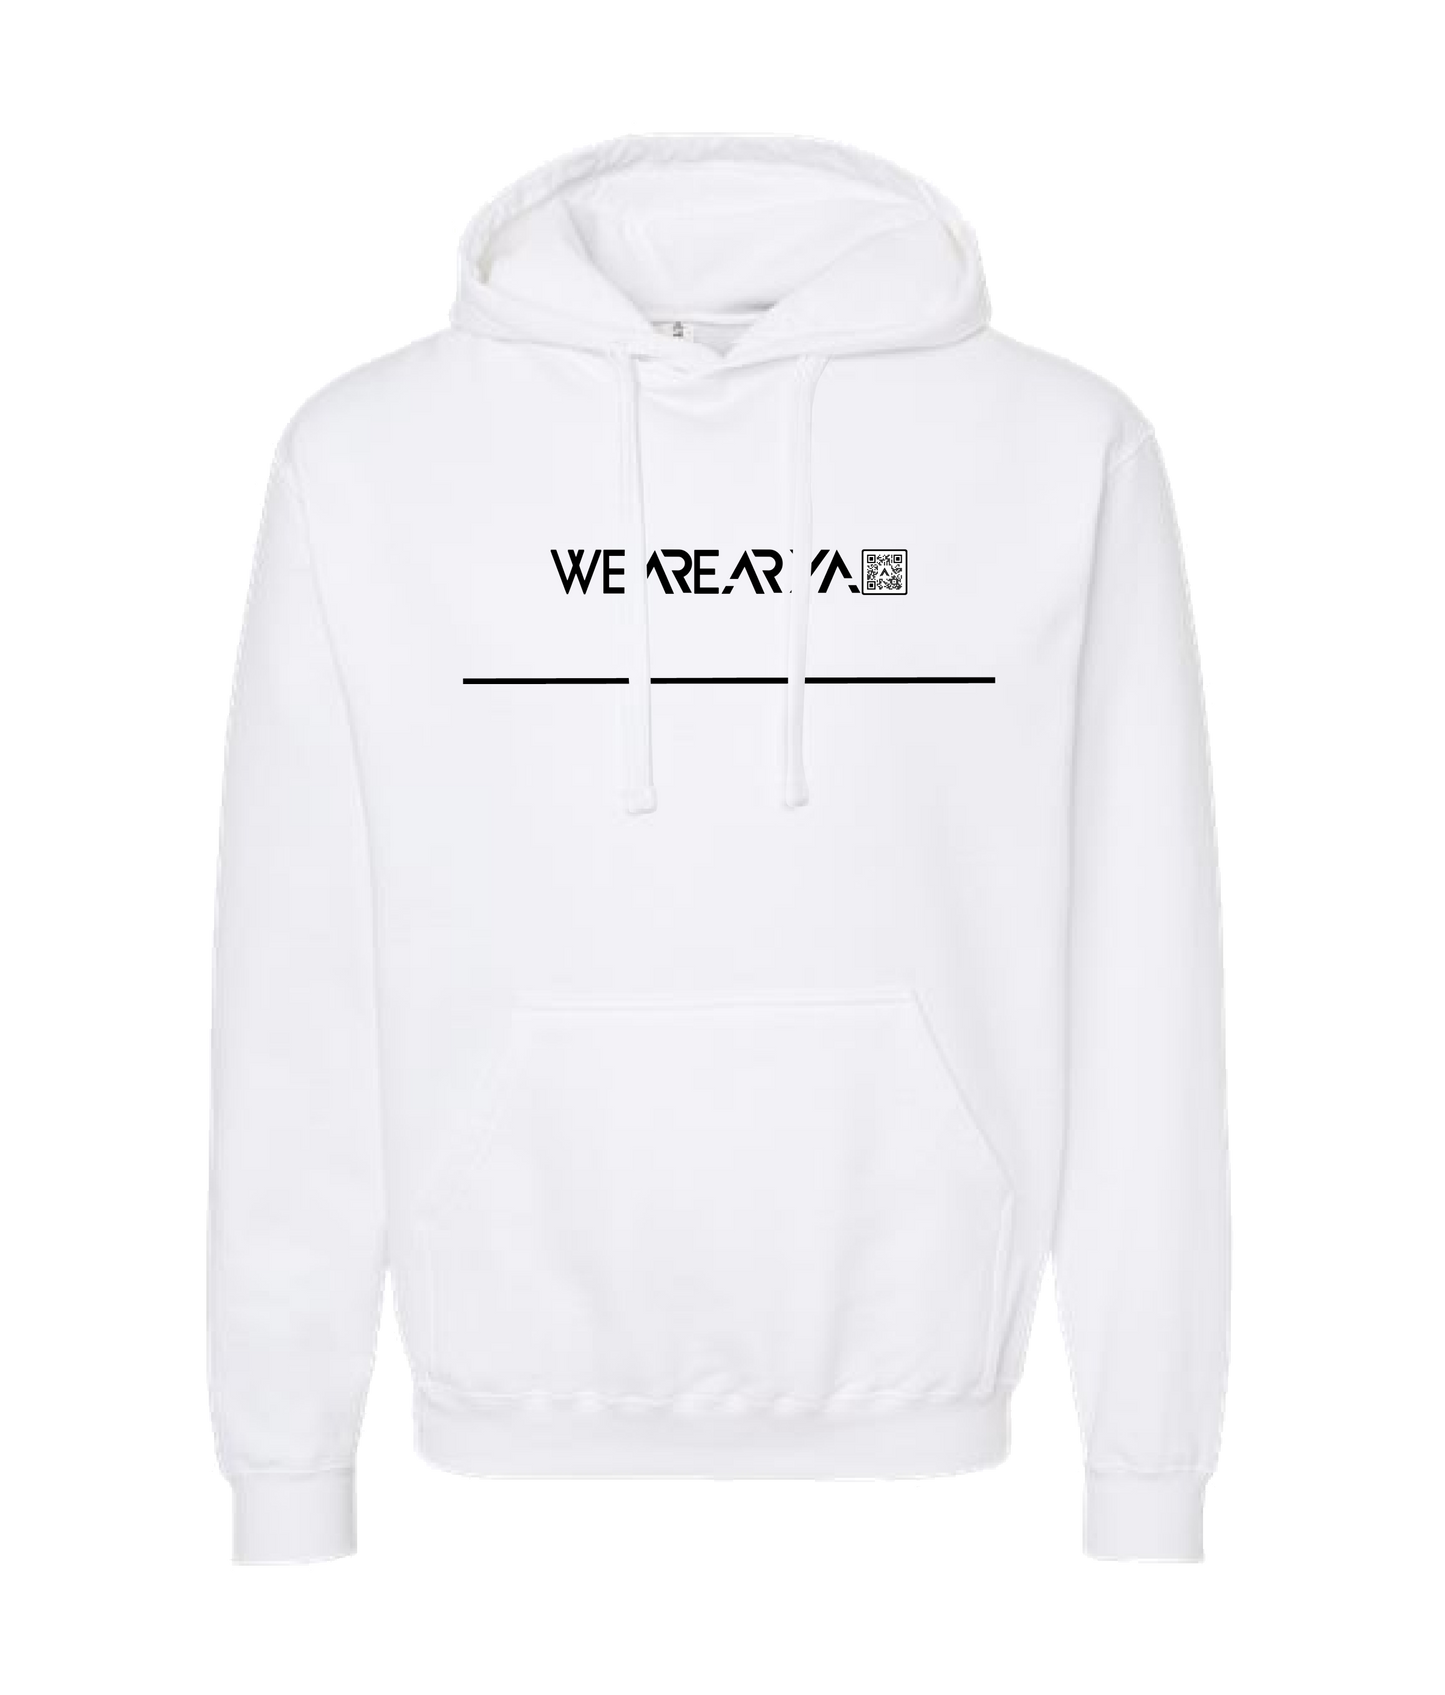 We Are Arya - Write Your Own - White Hoodie